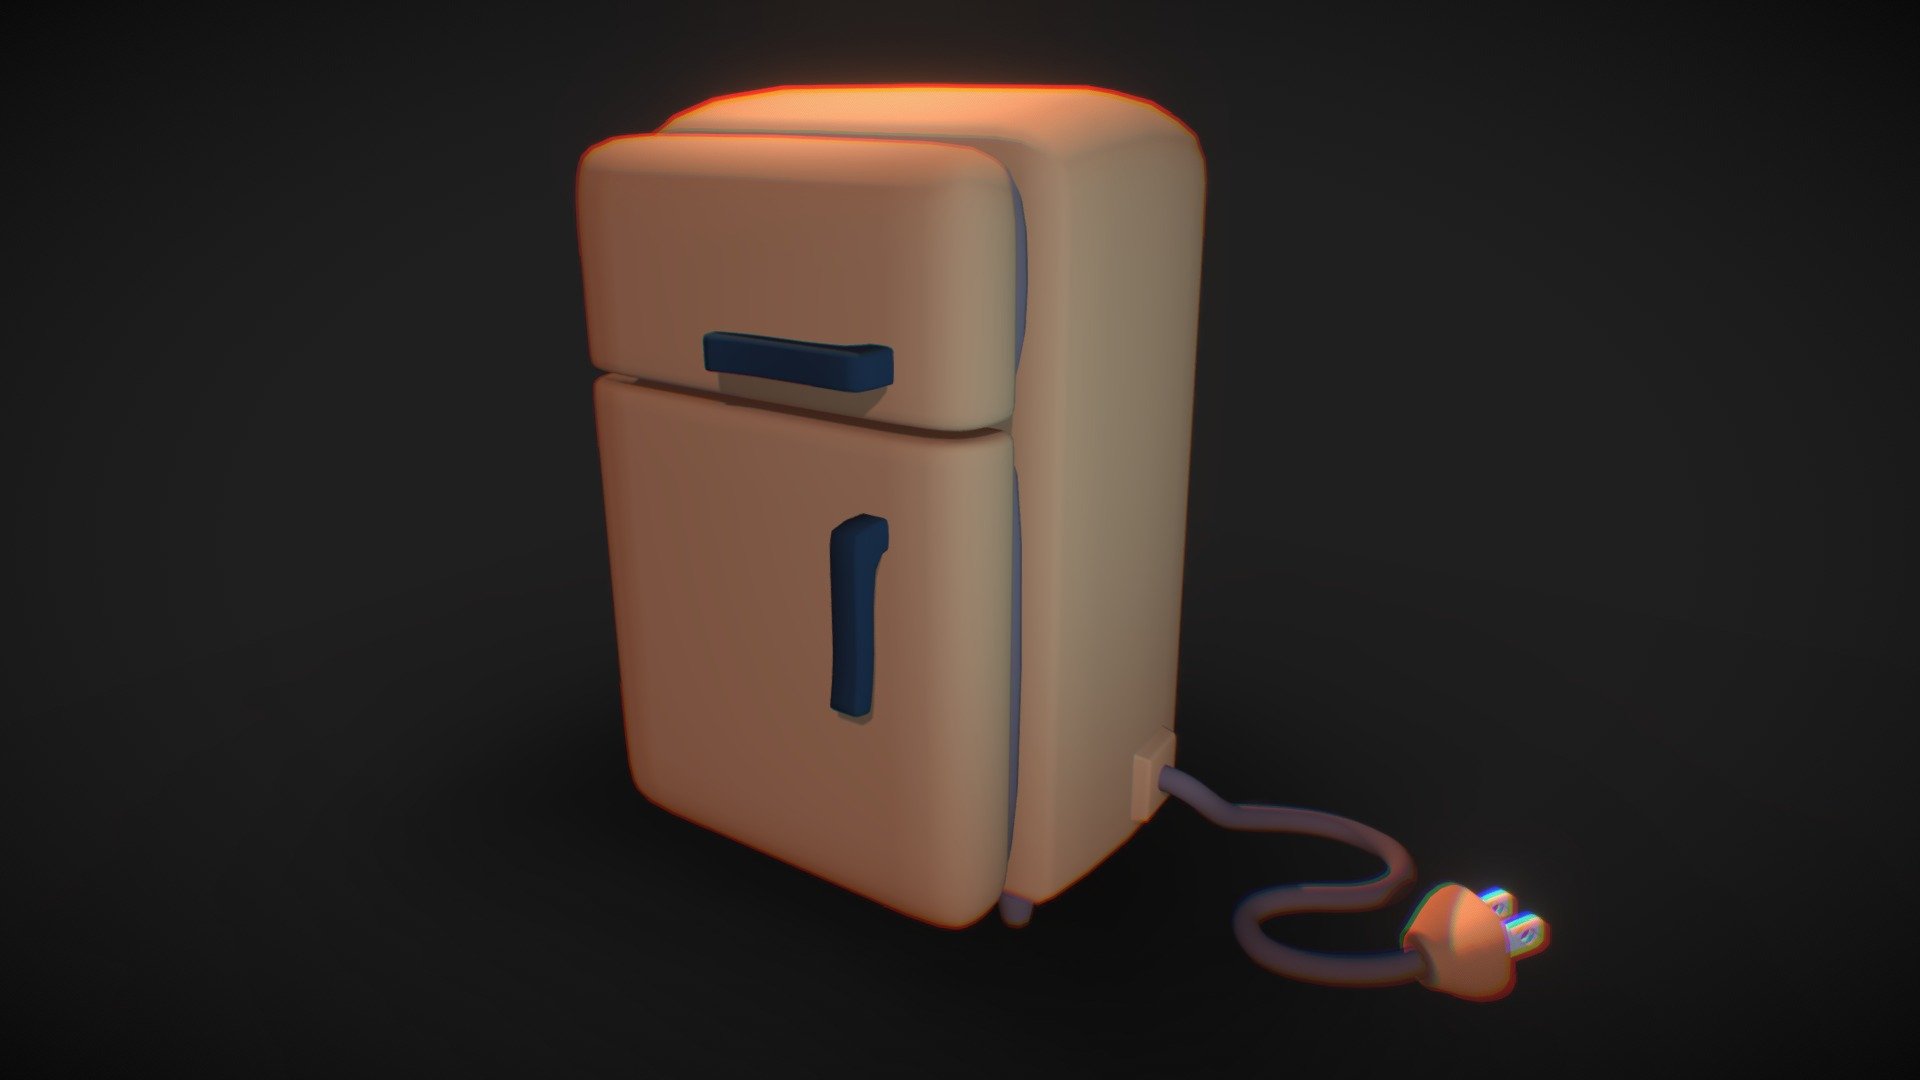 Here is a low poly fridge that I created with blender, threw this together in a couple of hours just for practice. 
I hope you’ll like it and if you have any critics or advice, be sure to write them below 😊

ArtStation:https://www.artstation.com/dfahix - Stylized fridge - 3D model by Dfahix 3d model